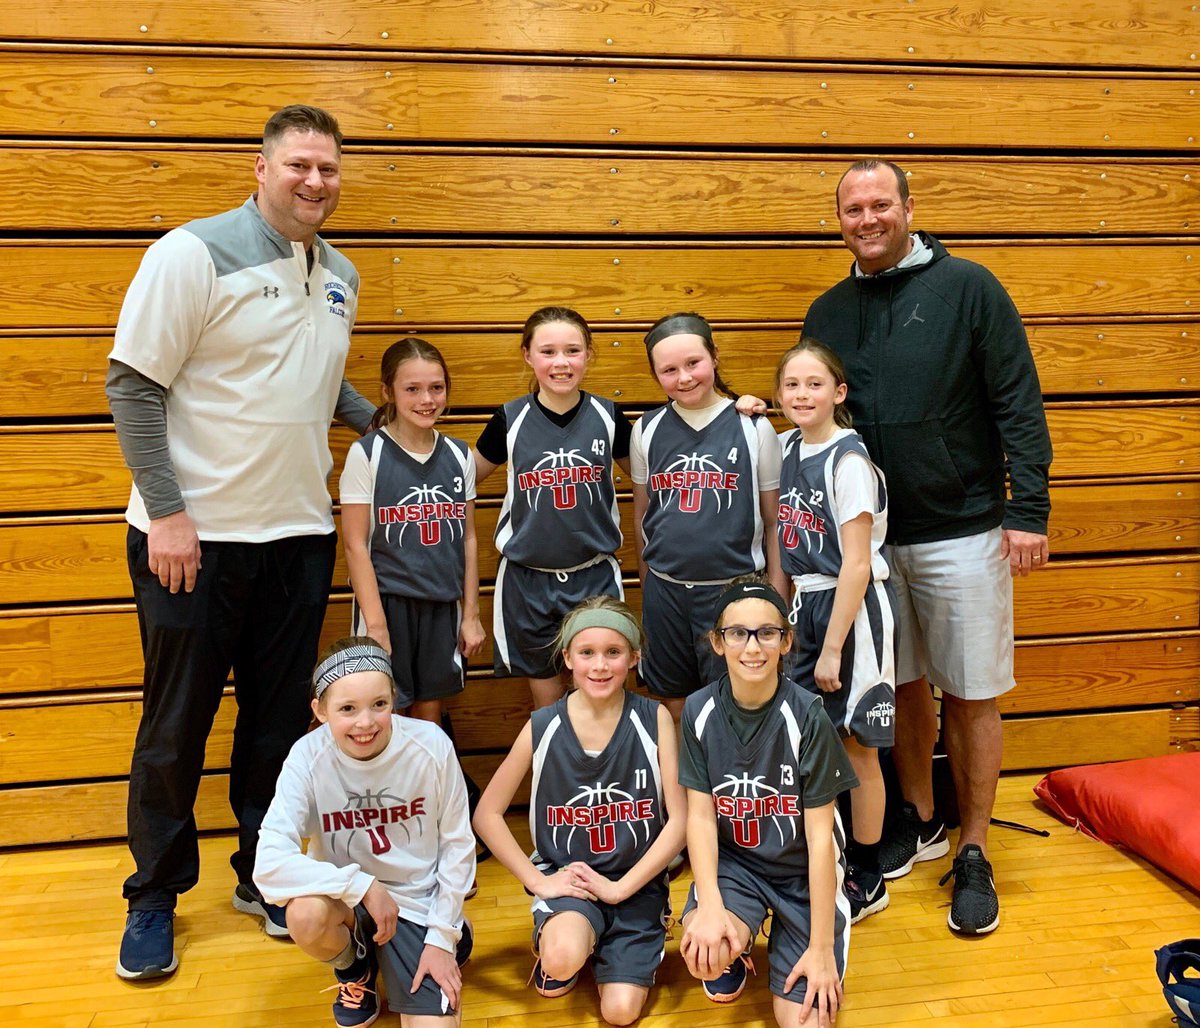 Girls’ 4th grade team opens up their MXP winter league with a win today! #Inspired #LadyBallers